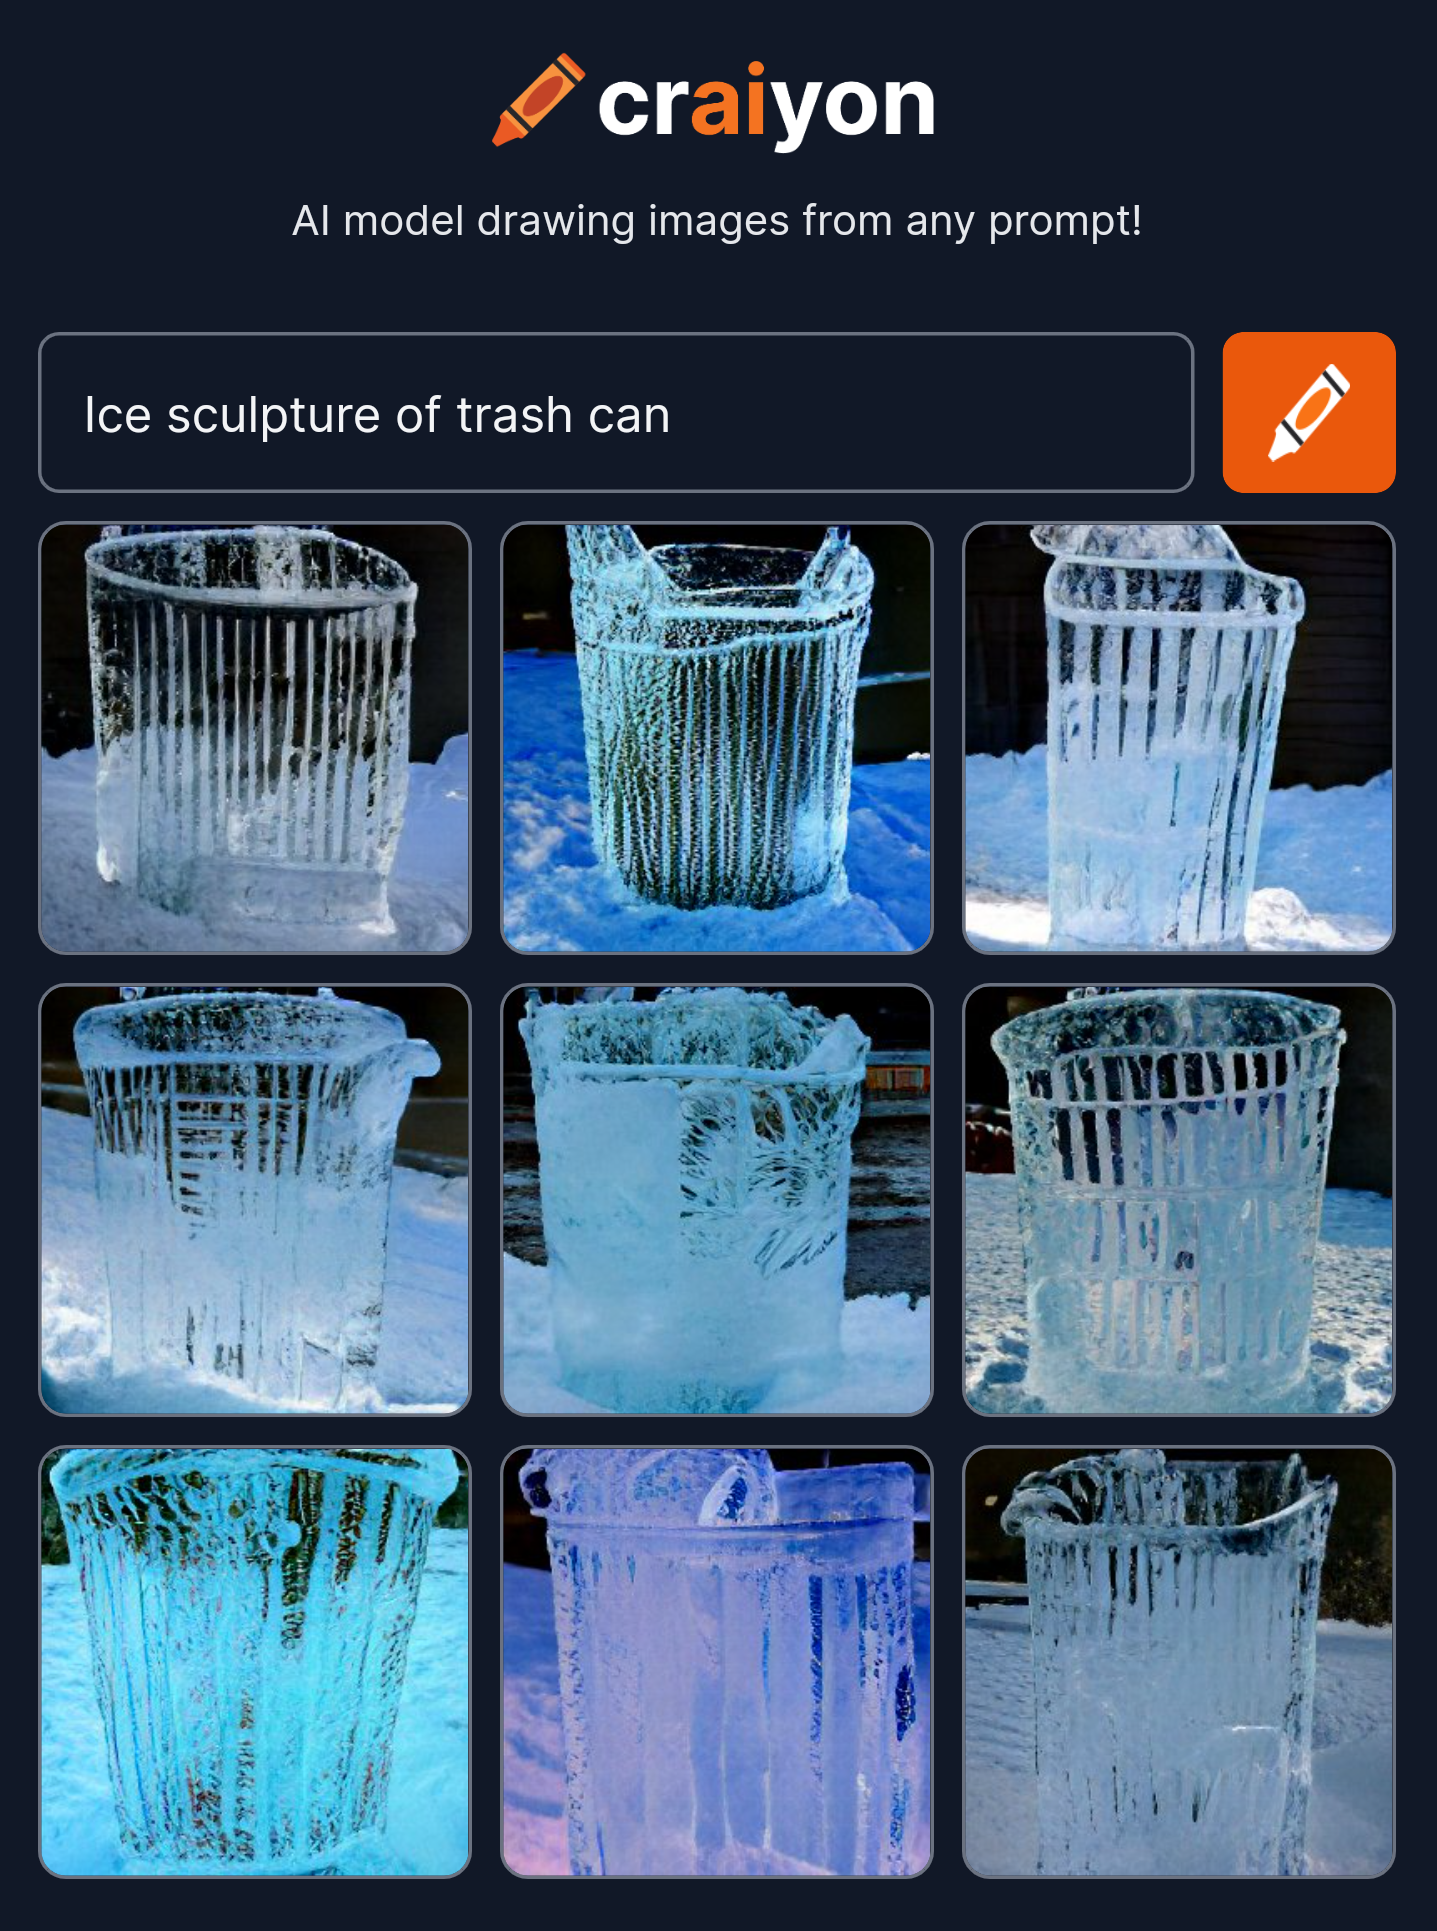 craiyon_211805_Ice_sculpture_of_trash_can.jpg.png